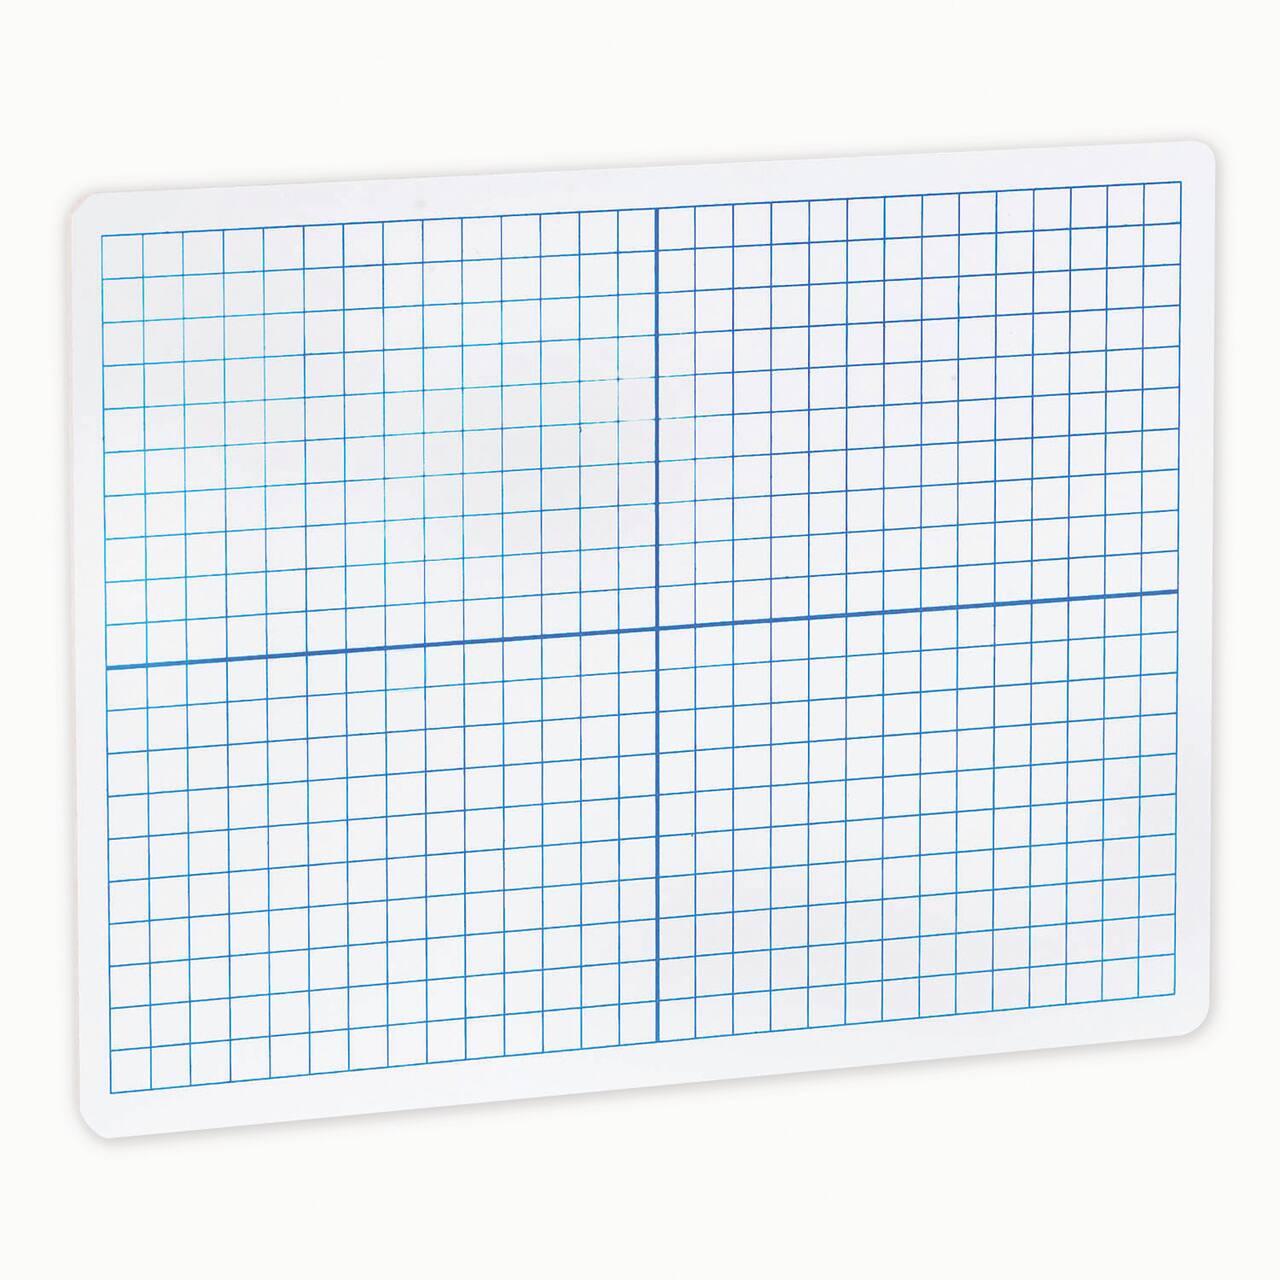 XY Axis Dual Sided Dry Erase Boards Classpack